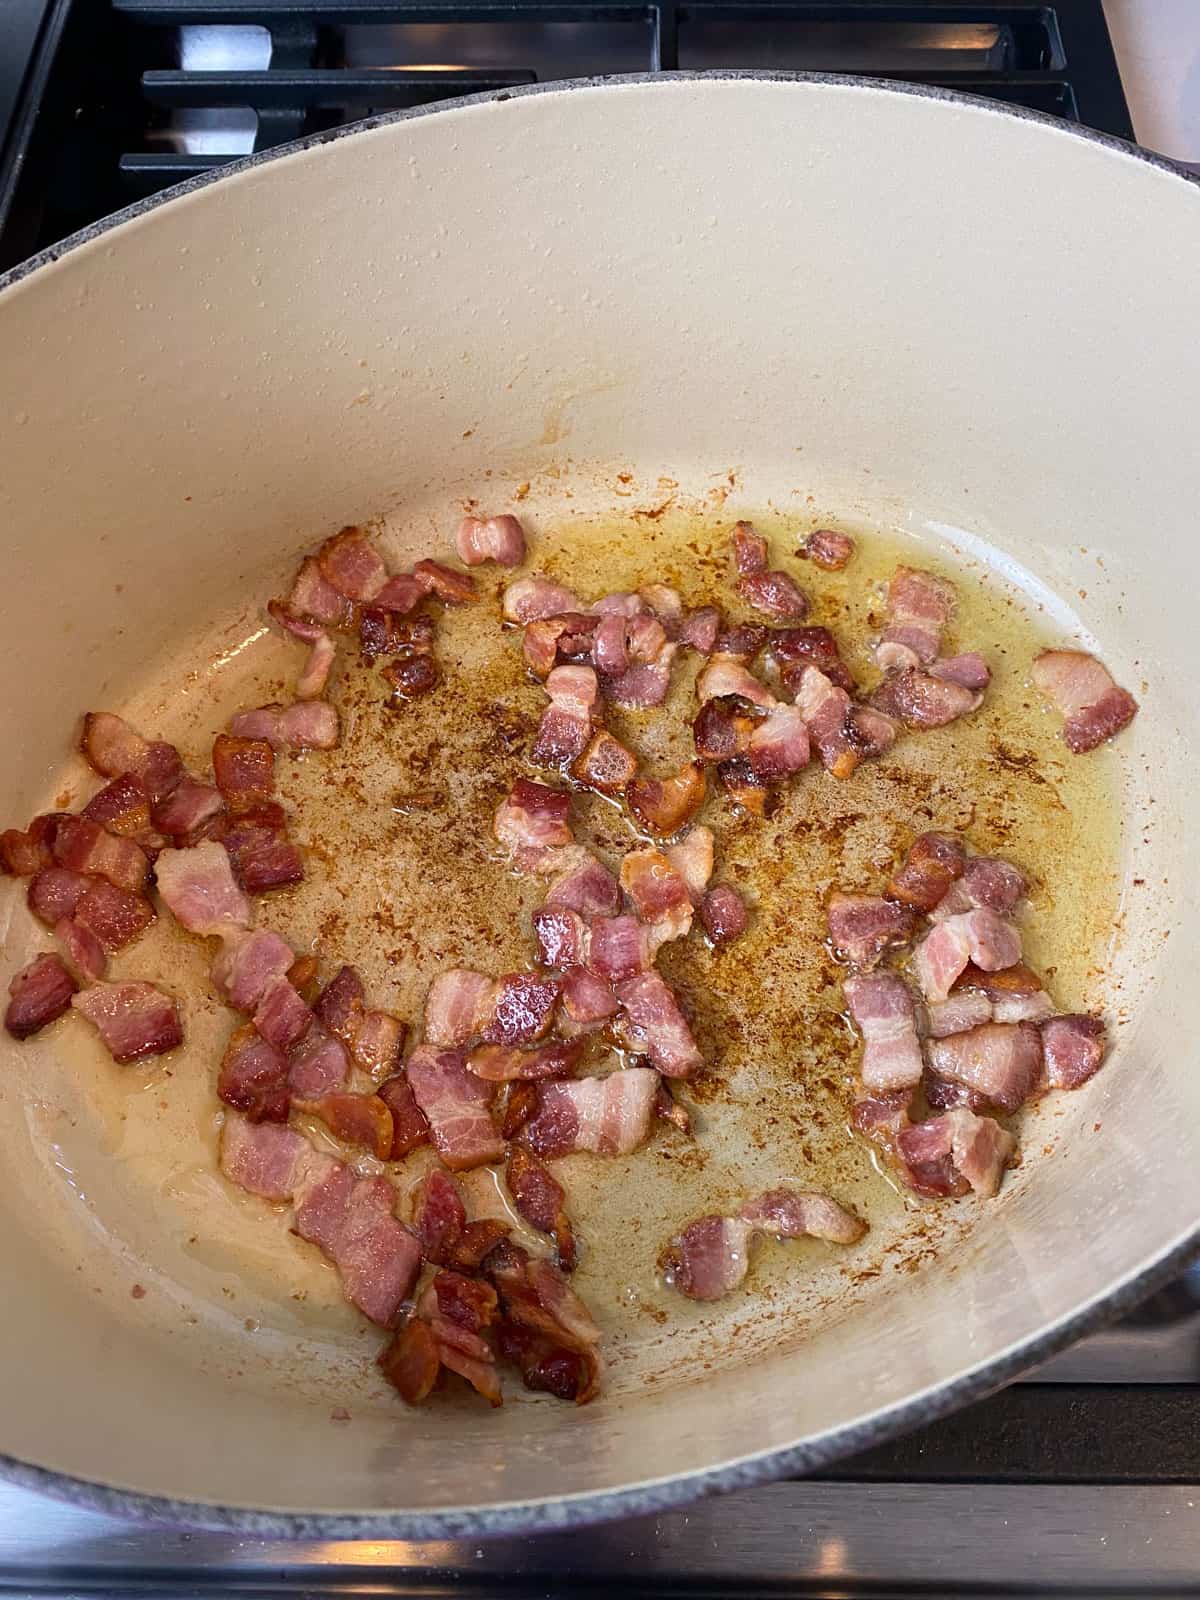 Cook chopped bacon until fat renders and the bacon is crispy, then remove and set aside.